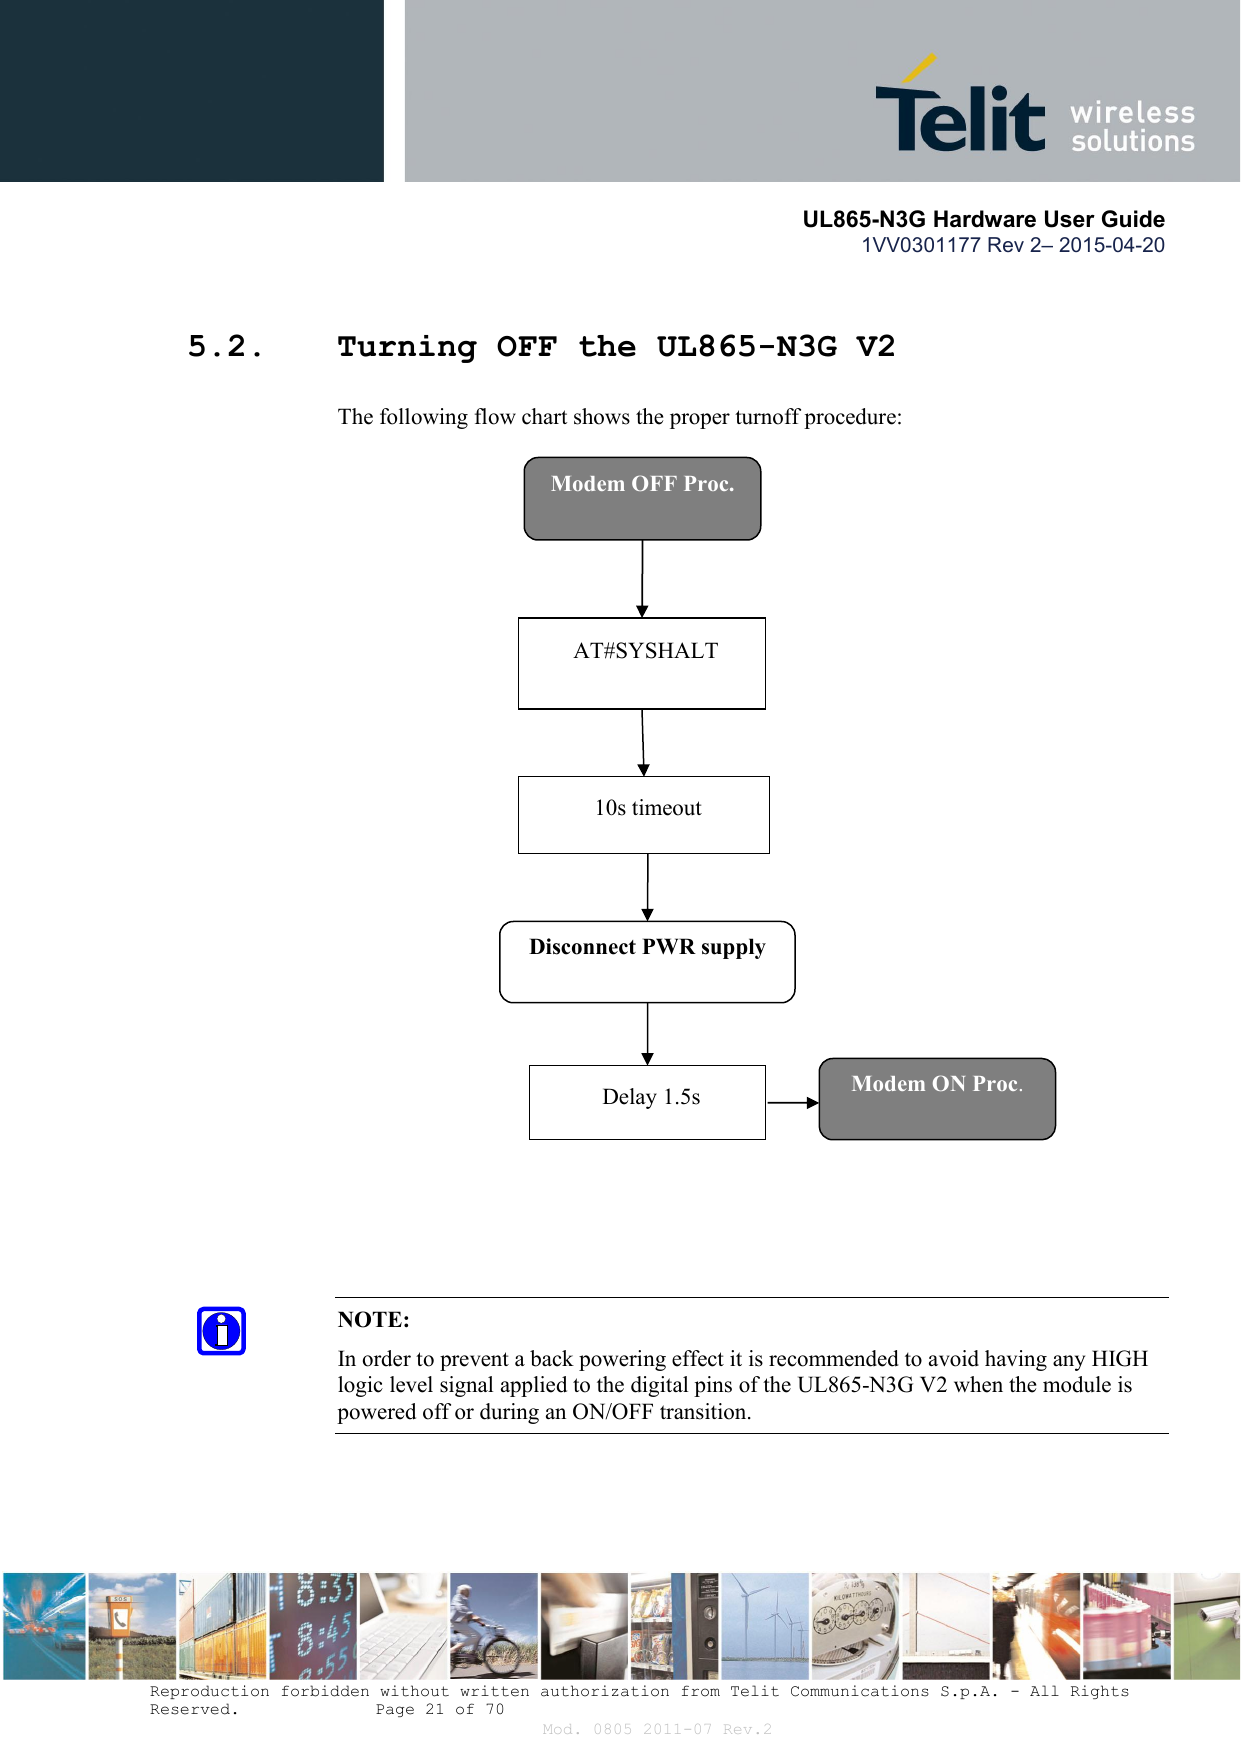       UL865-N3G Hardware User Guide 1VV0301177 Rev 2– 2015-04-20  Reproduction forbidden without written authorization from Telit Communications S.p.A. - All Rights Reserved.    Page 21 of 70 Mod. 0805 2011-07 Rev.2 5.2. Turning OFF the UL865-N3G V2 The following flow chart shows the proper turnoff procedure:   NOTE: In order to prevent a back powering effect it is recommended to avoid having any HIGH logic level signal applied to the digital pins of the UL865-N3G V2 when the module is powered off or during an ON/OFF transition.  Modem OFF Proc. AT#SYSHALT Disconnect PWR supply 10s timeout Modem ON Proc. Delay 1.5s 